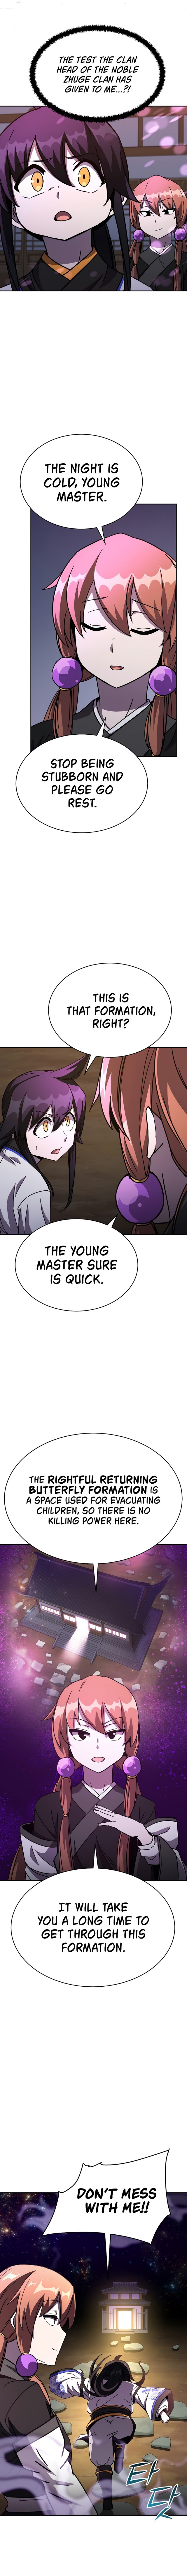 Martial Streamer - Chapter 7 Page 15